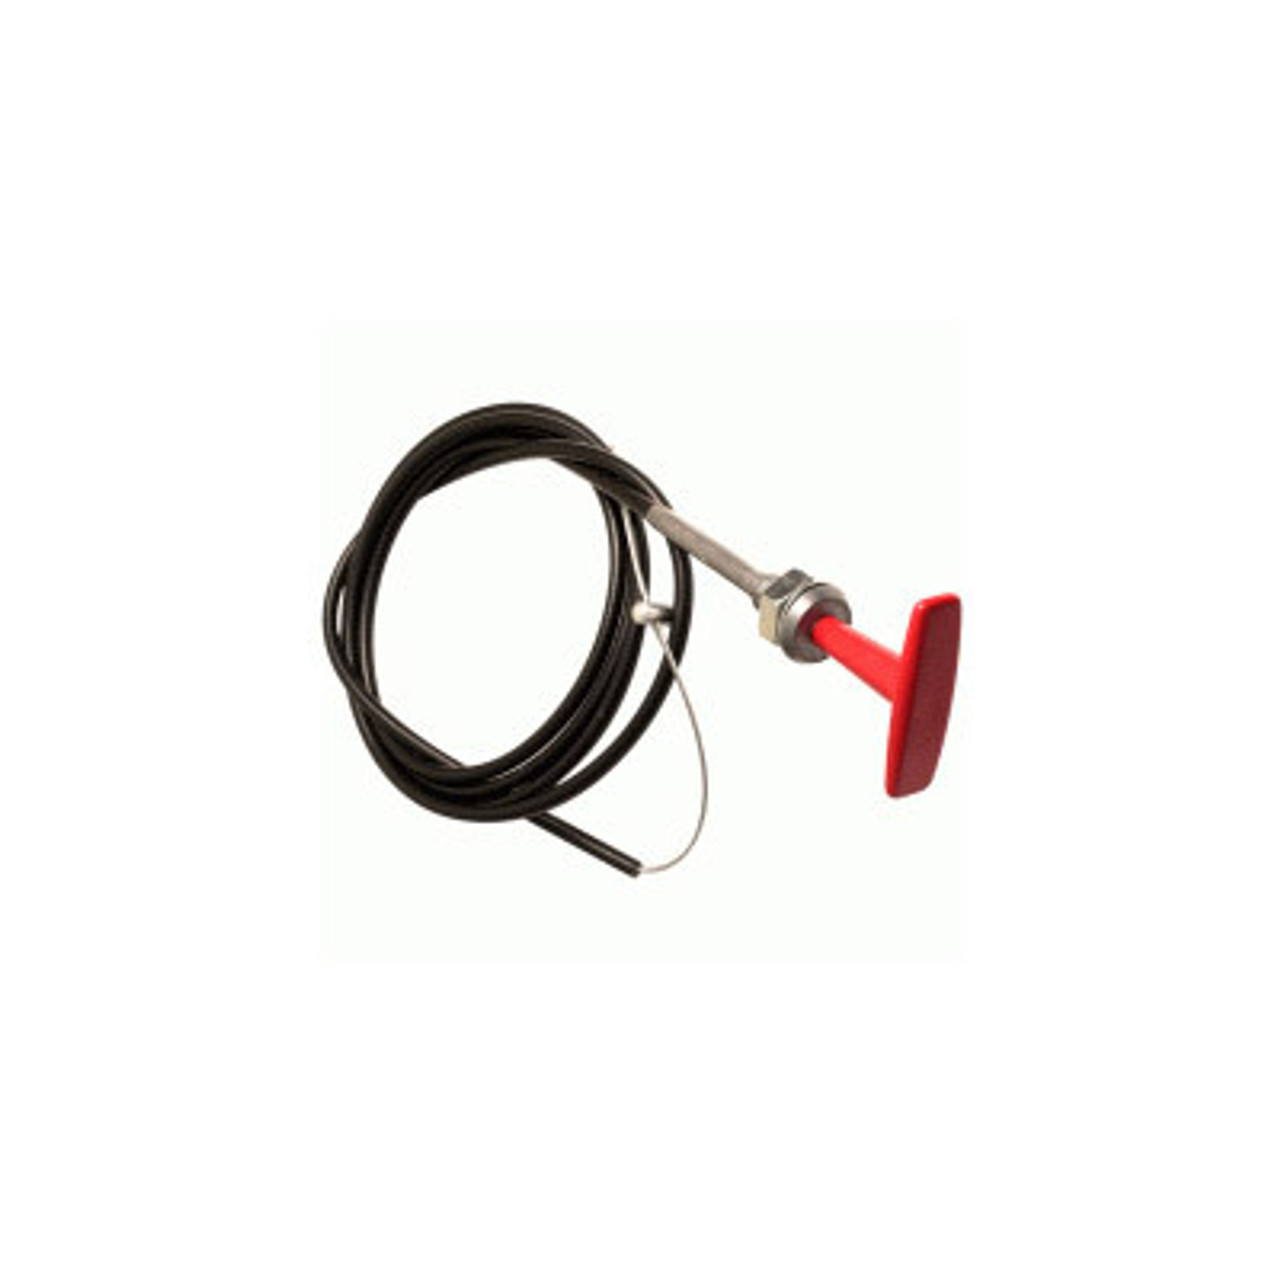 Lifeline T Handle Fire Extinguisher Pull Cable - 6FT